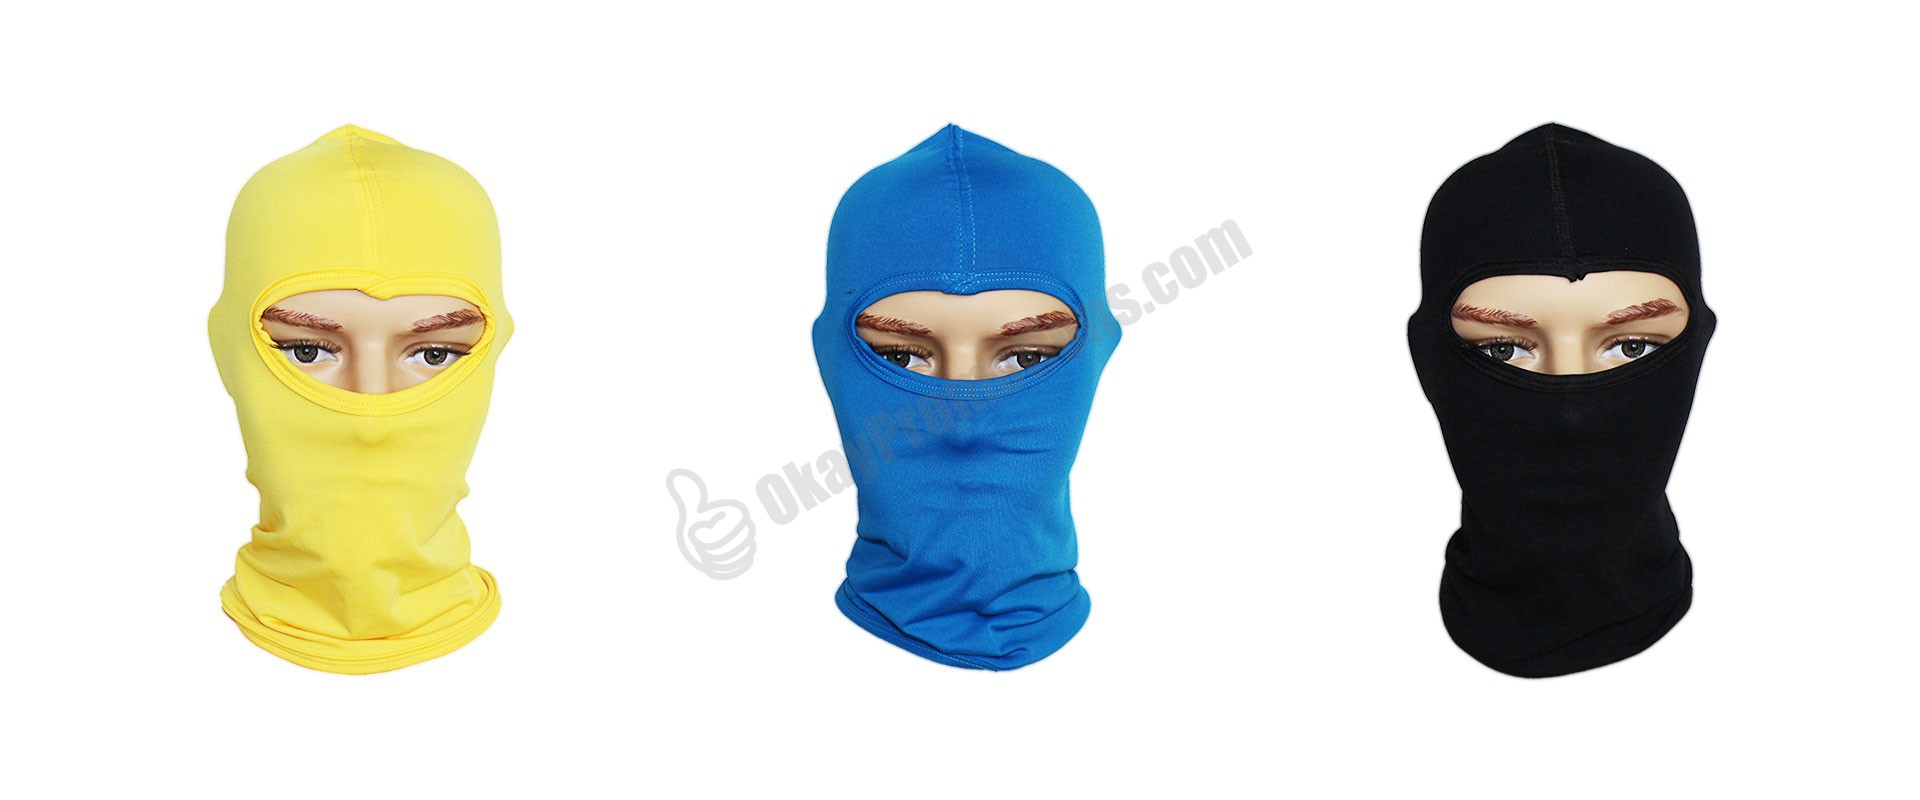 Custom Logo Imprinted Promotional Whole Wrap Masks Personalized Message Sales Campaign Promo Gifts Marketing Giveaways